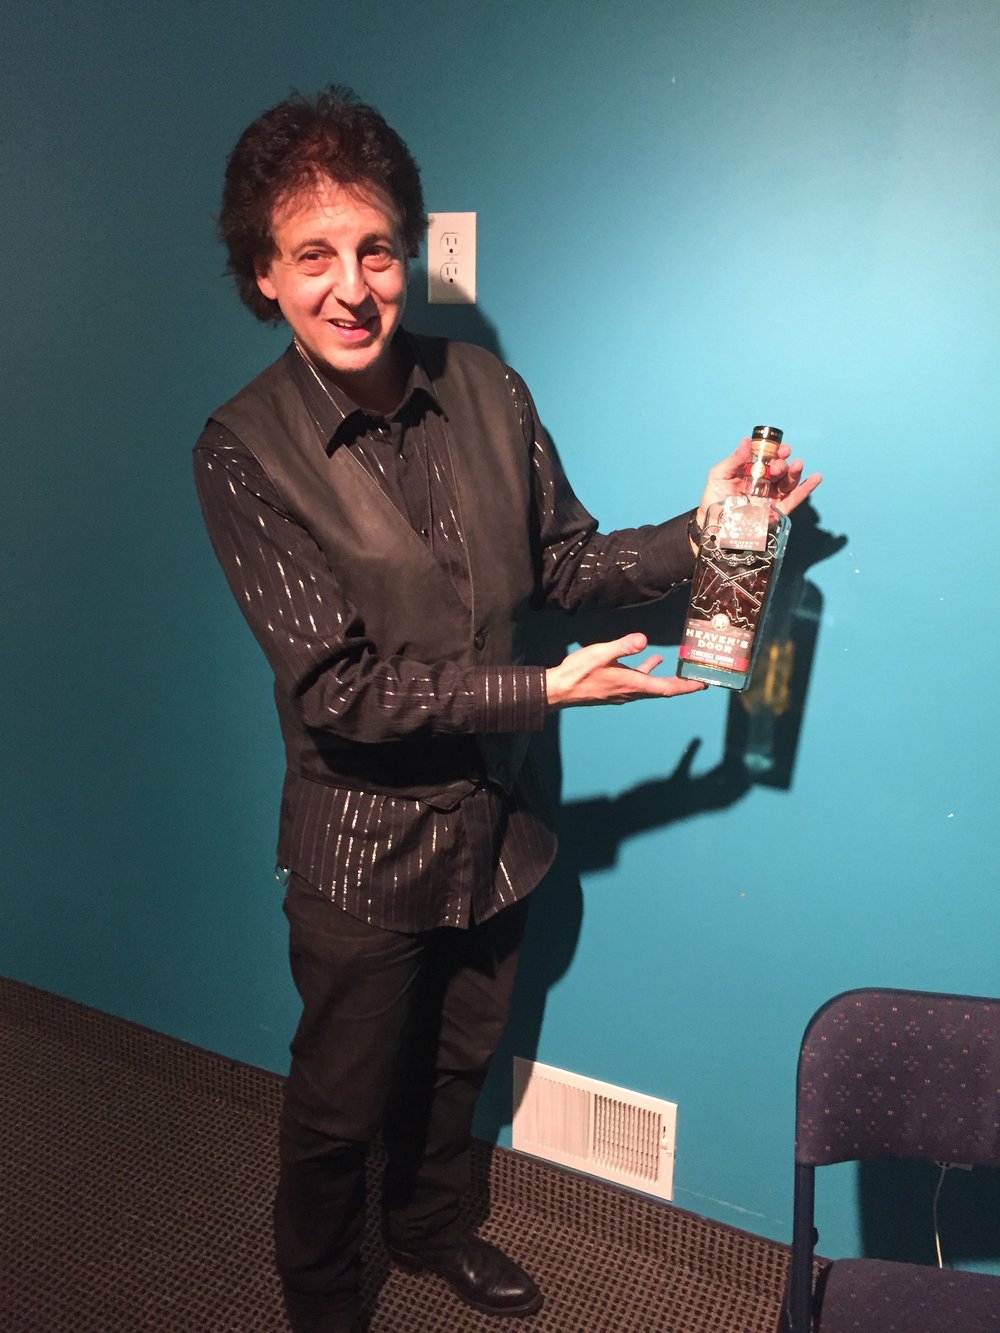  Magic Marc with&nbsp; Heaven's Door Whiskey &nbsp;Wall Of Power TV - Bob Dylan's More Blood, More Tracks - The Minneapolis Sessions &nbsp;Metro Cable Network - Channel 6 Minneapolis, MN / October 23rd, 2018 / Photo by Nelson T. French 